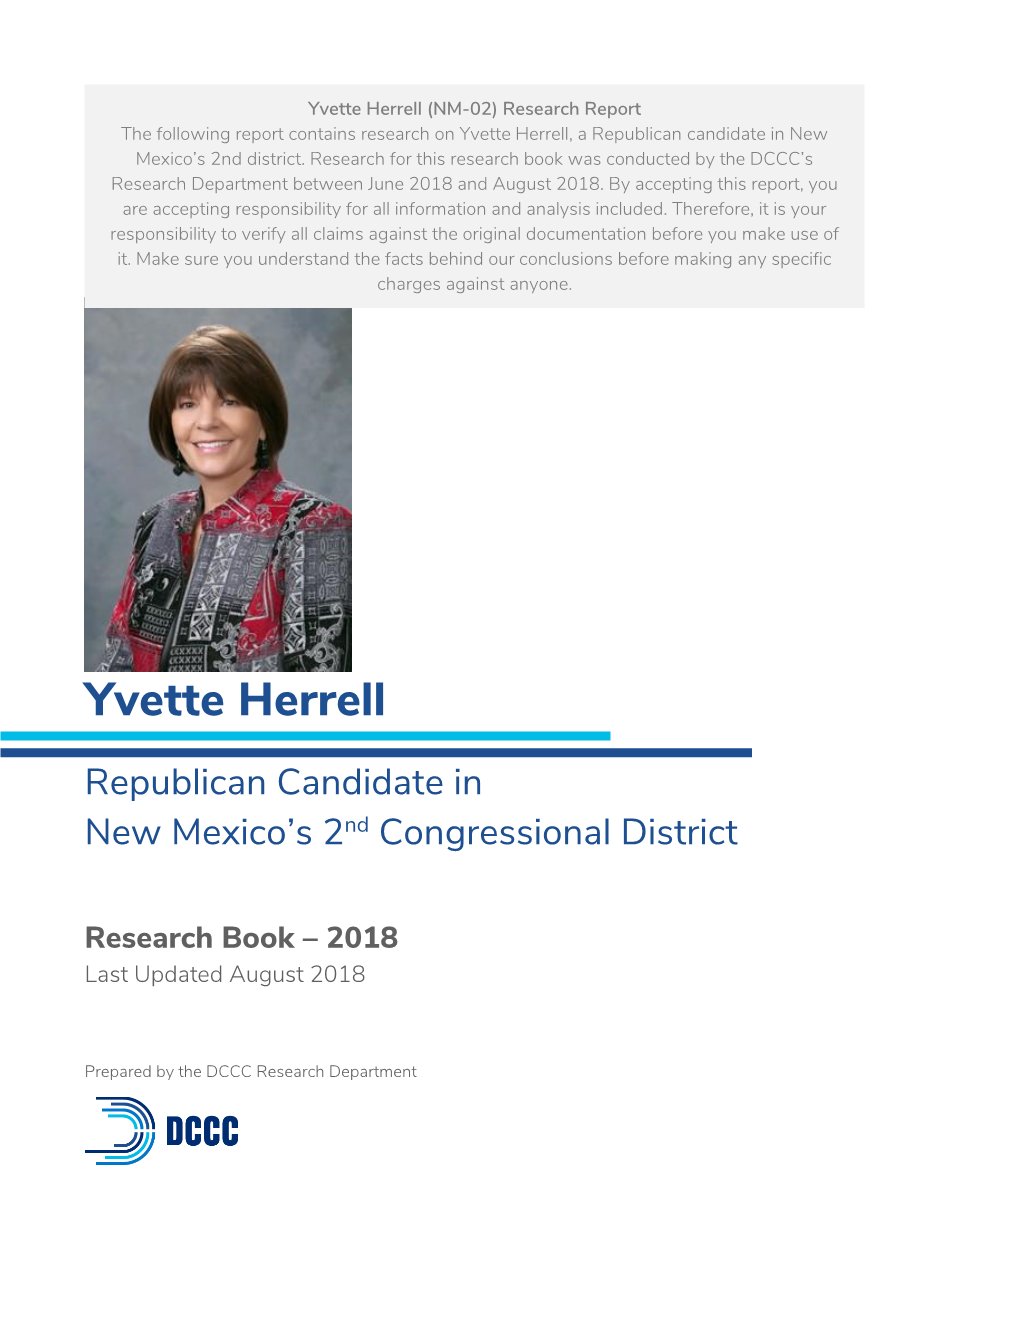 Yvette Herrell (NM-02) Research Report the Following Report Contains Research on Yvette Herrell, a Republican Candidate in New Mexico’S 2Nd District